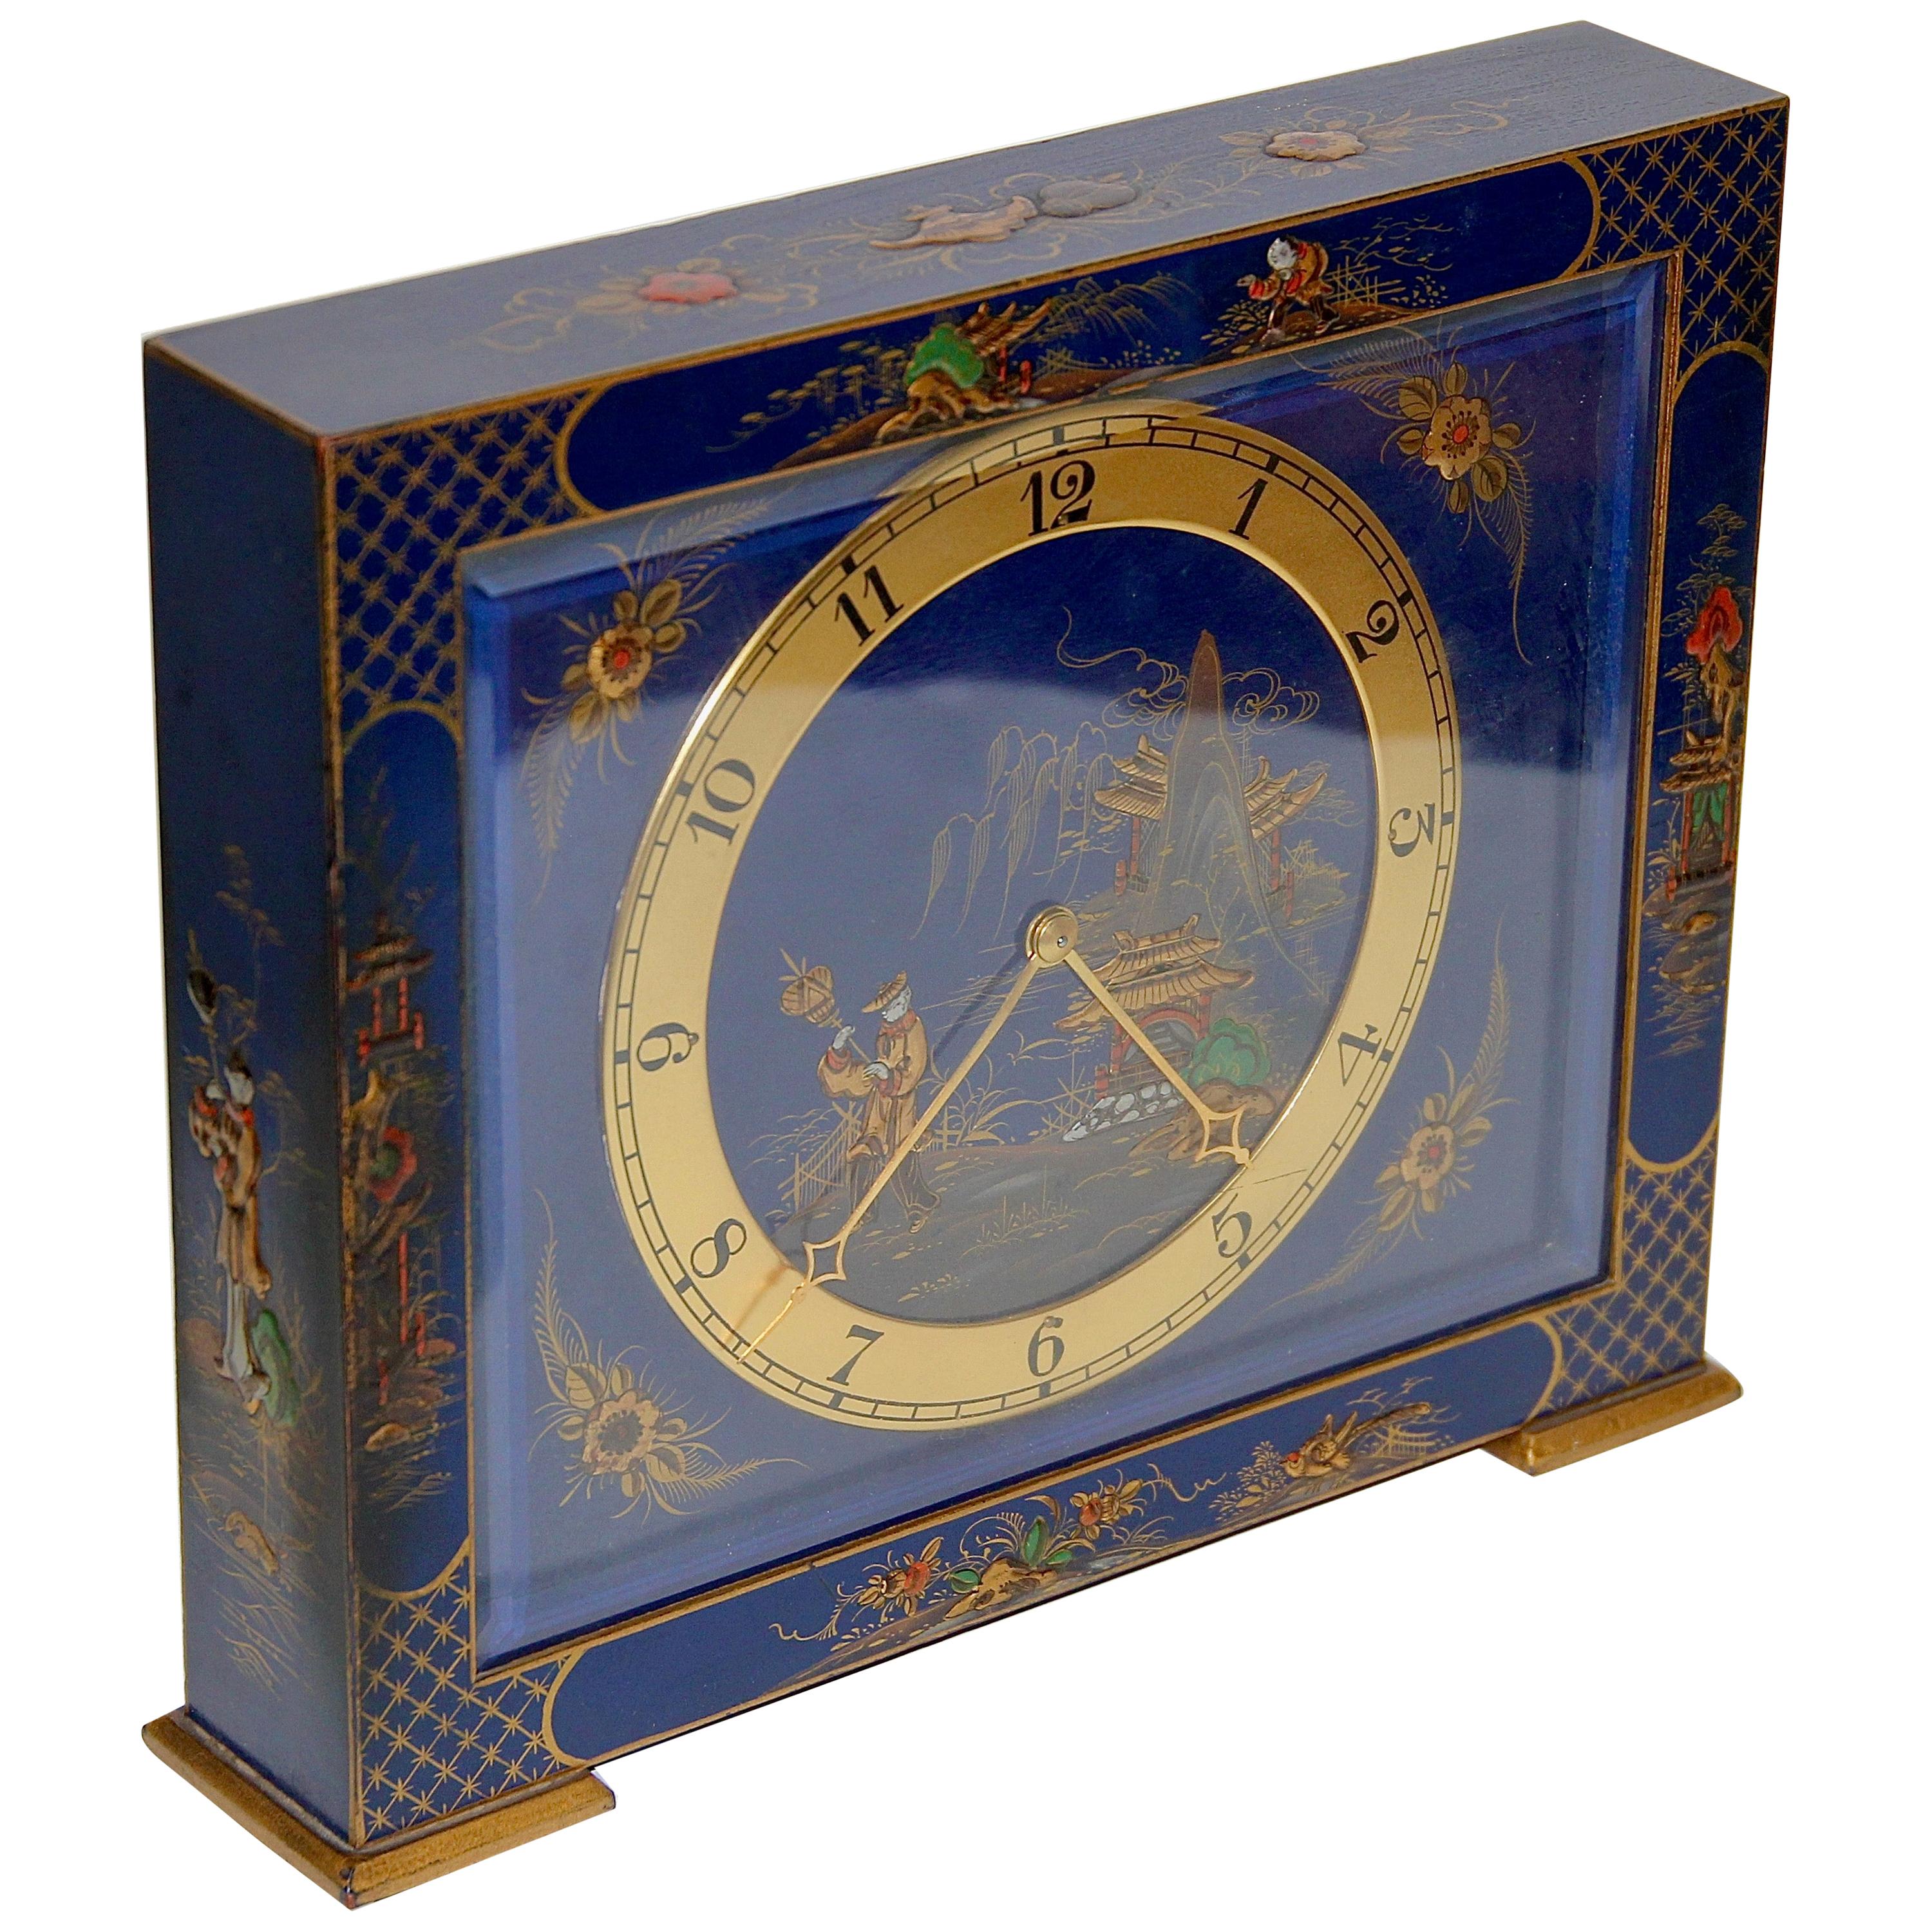 Antique Table Desk Clock, Painted, Chinoiserie, China Art